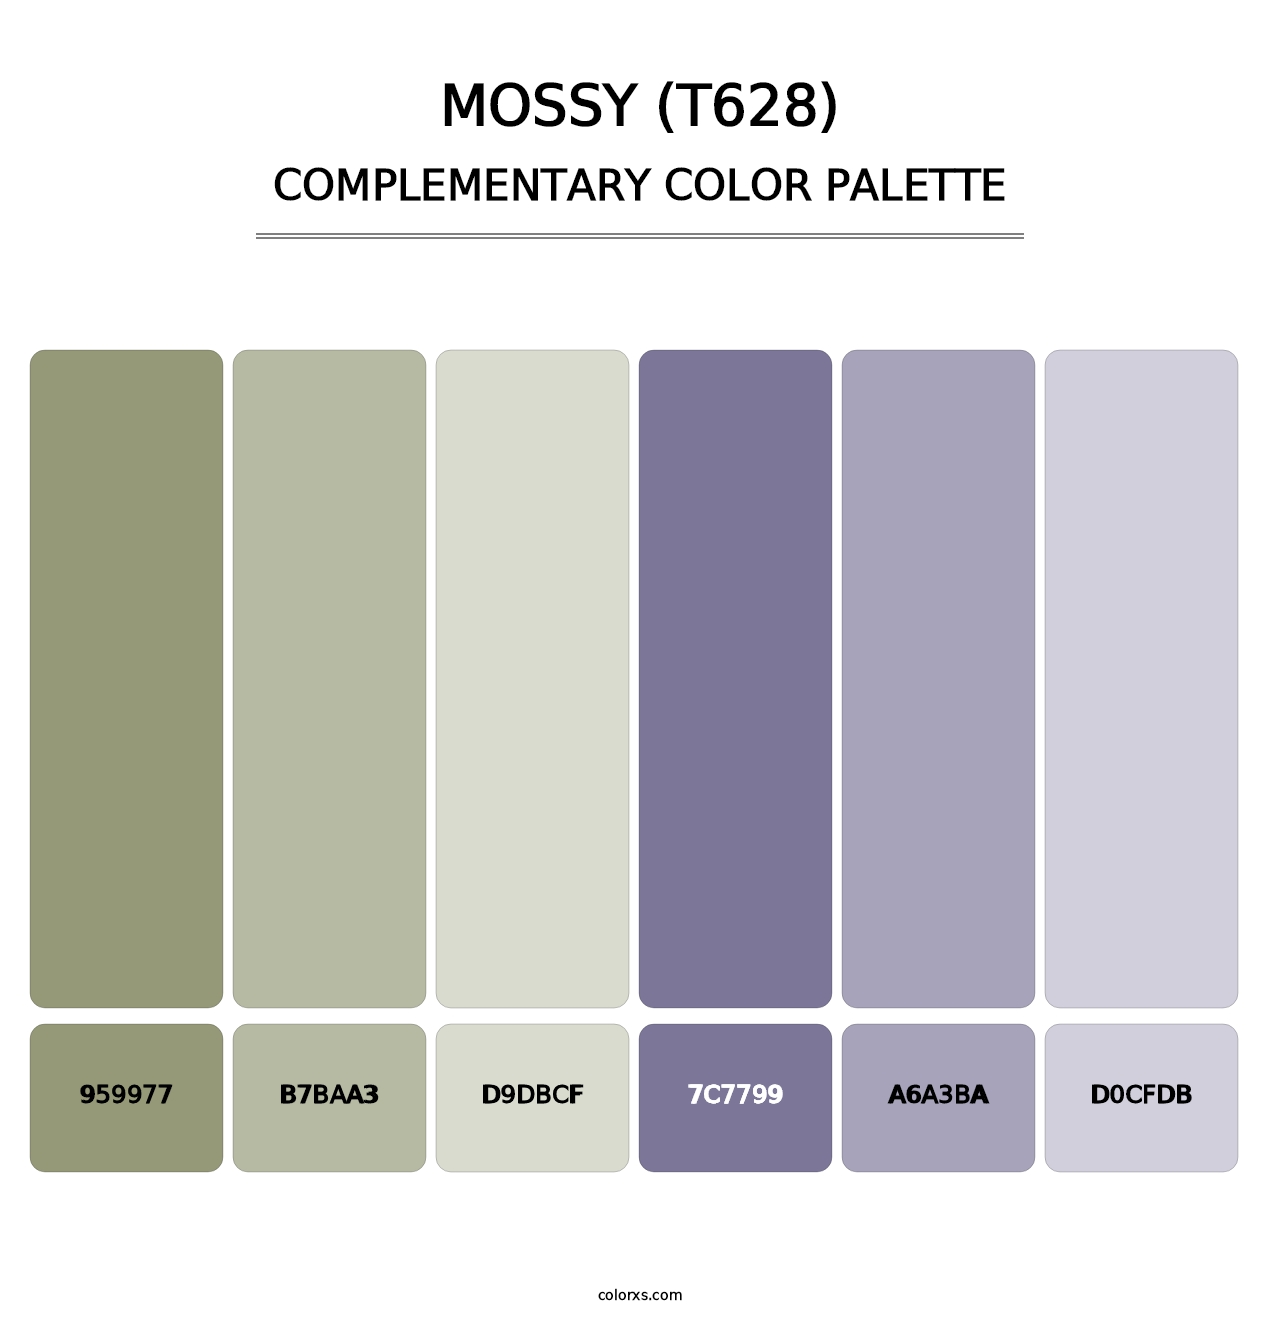 Mossy (T628) - Complementary Color Palette